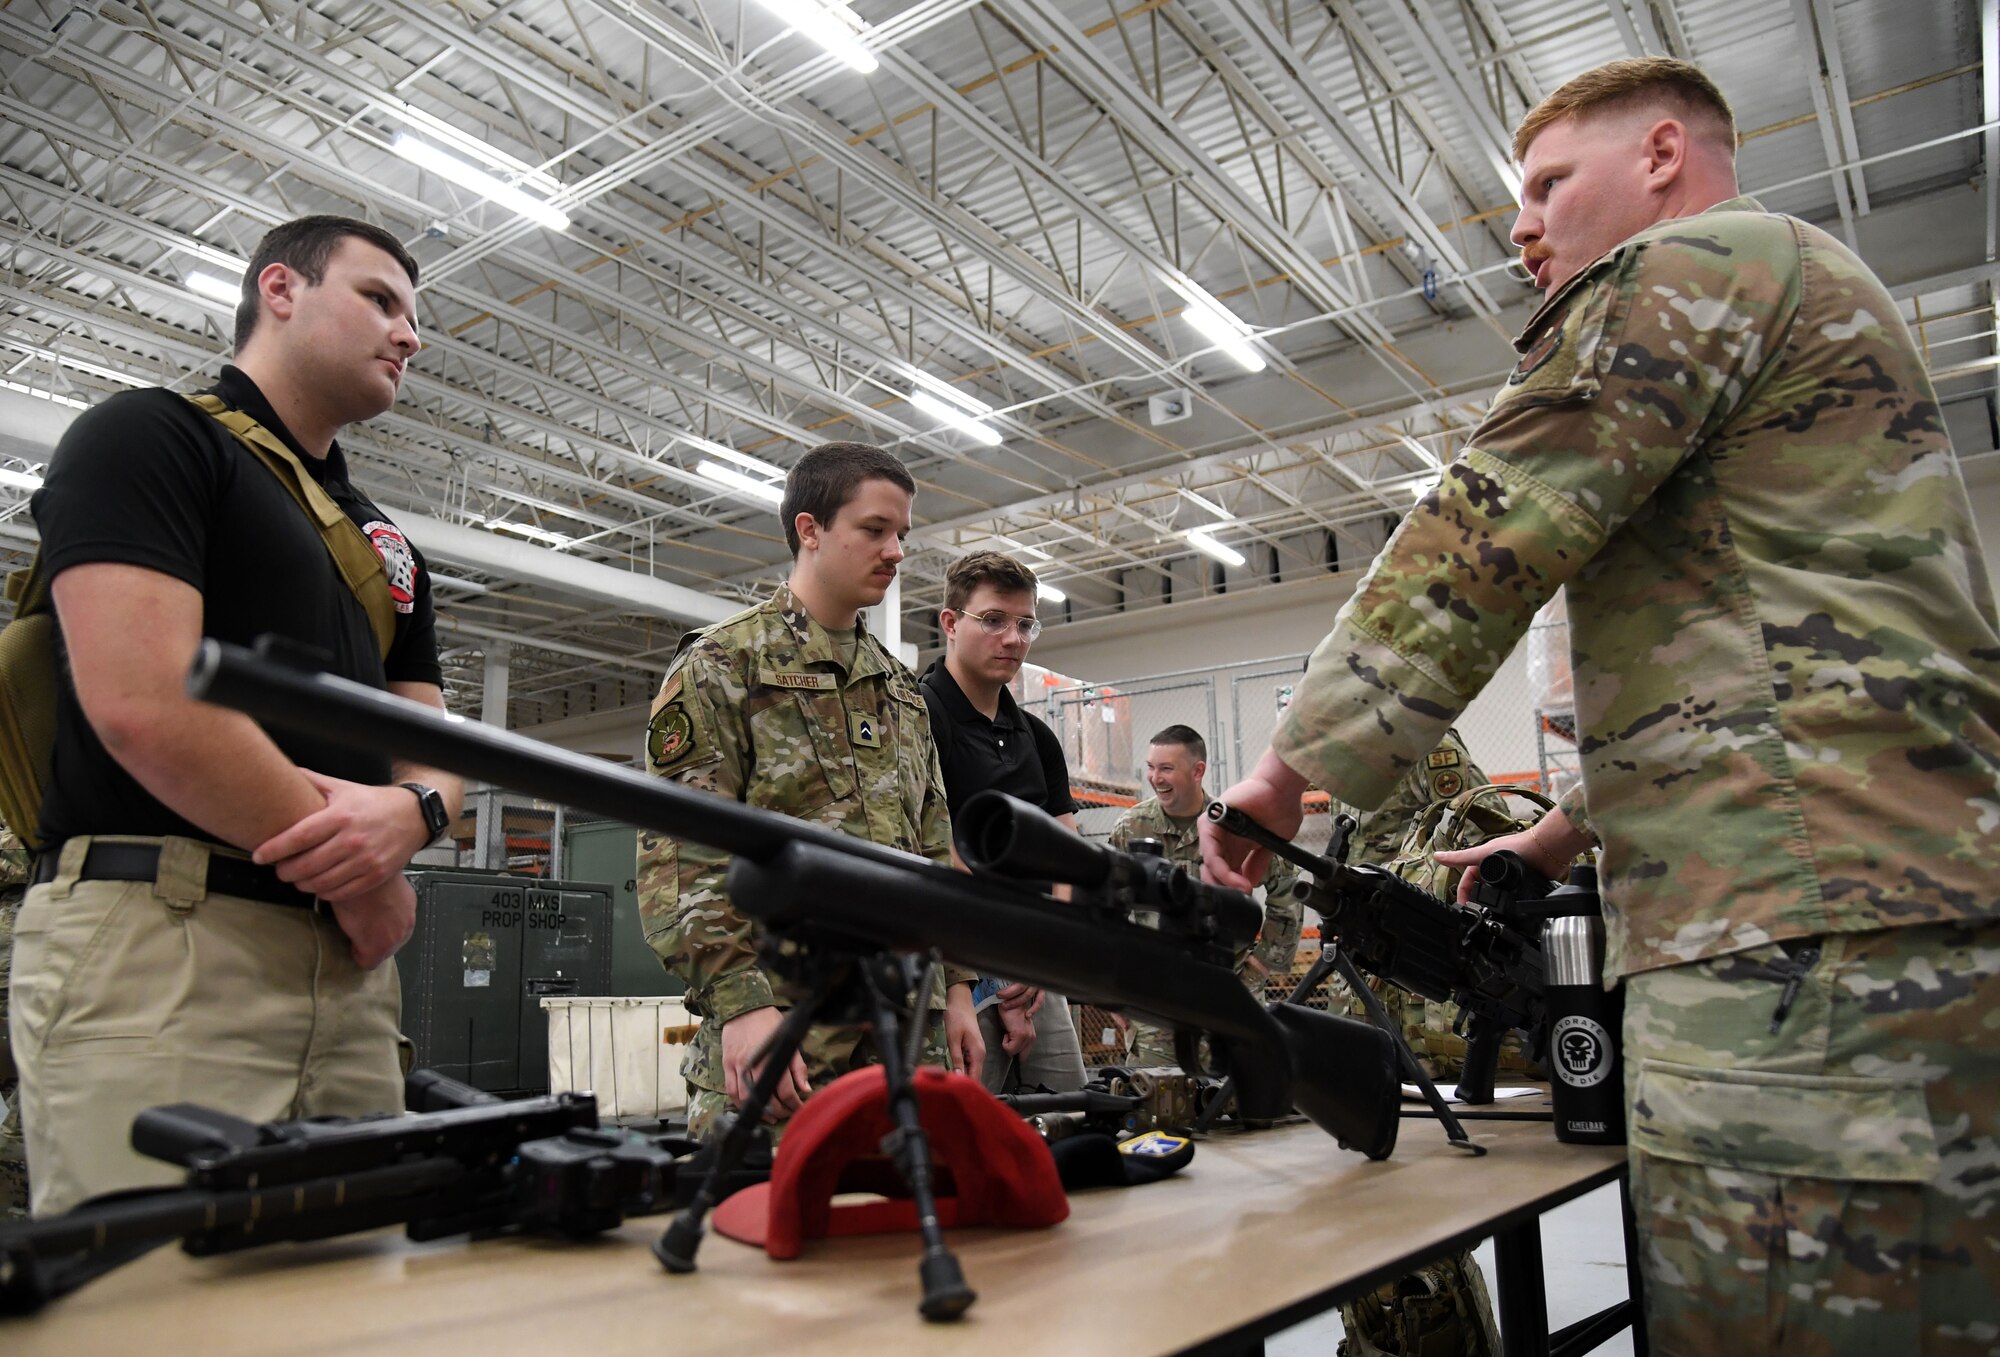 U.S. Air Force Staff Sgt. Anthony Ryan, 81st Security Forces Squadron armory NCO in charge, shows military weapons to Air Force ROTC cadets during Pathways to Blue inside the Roberts Consolidated Aircraft Maintenance Facility at Keesler Air Force Base, Mississippi, March 31, 2023.